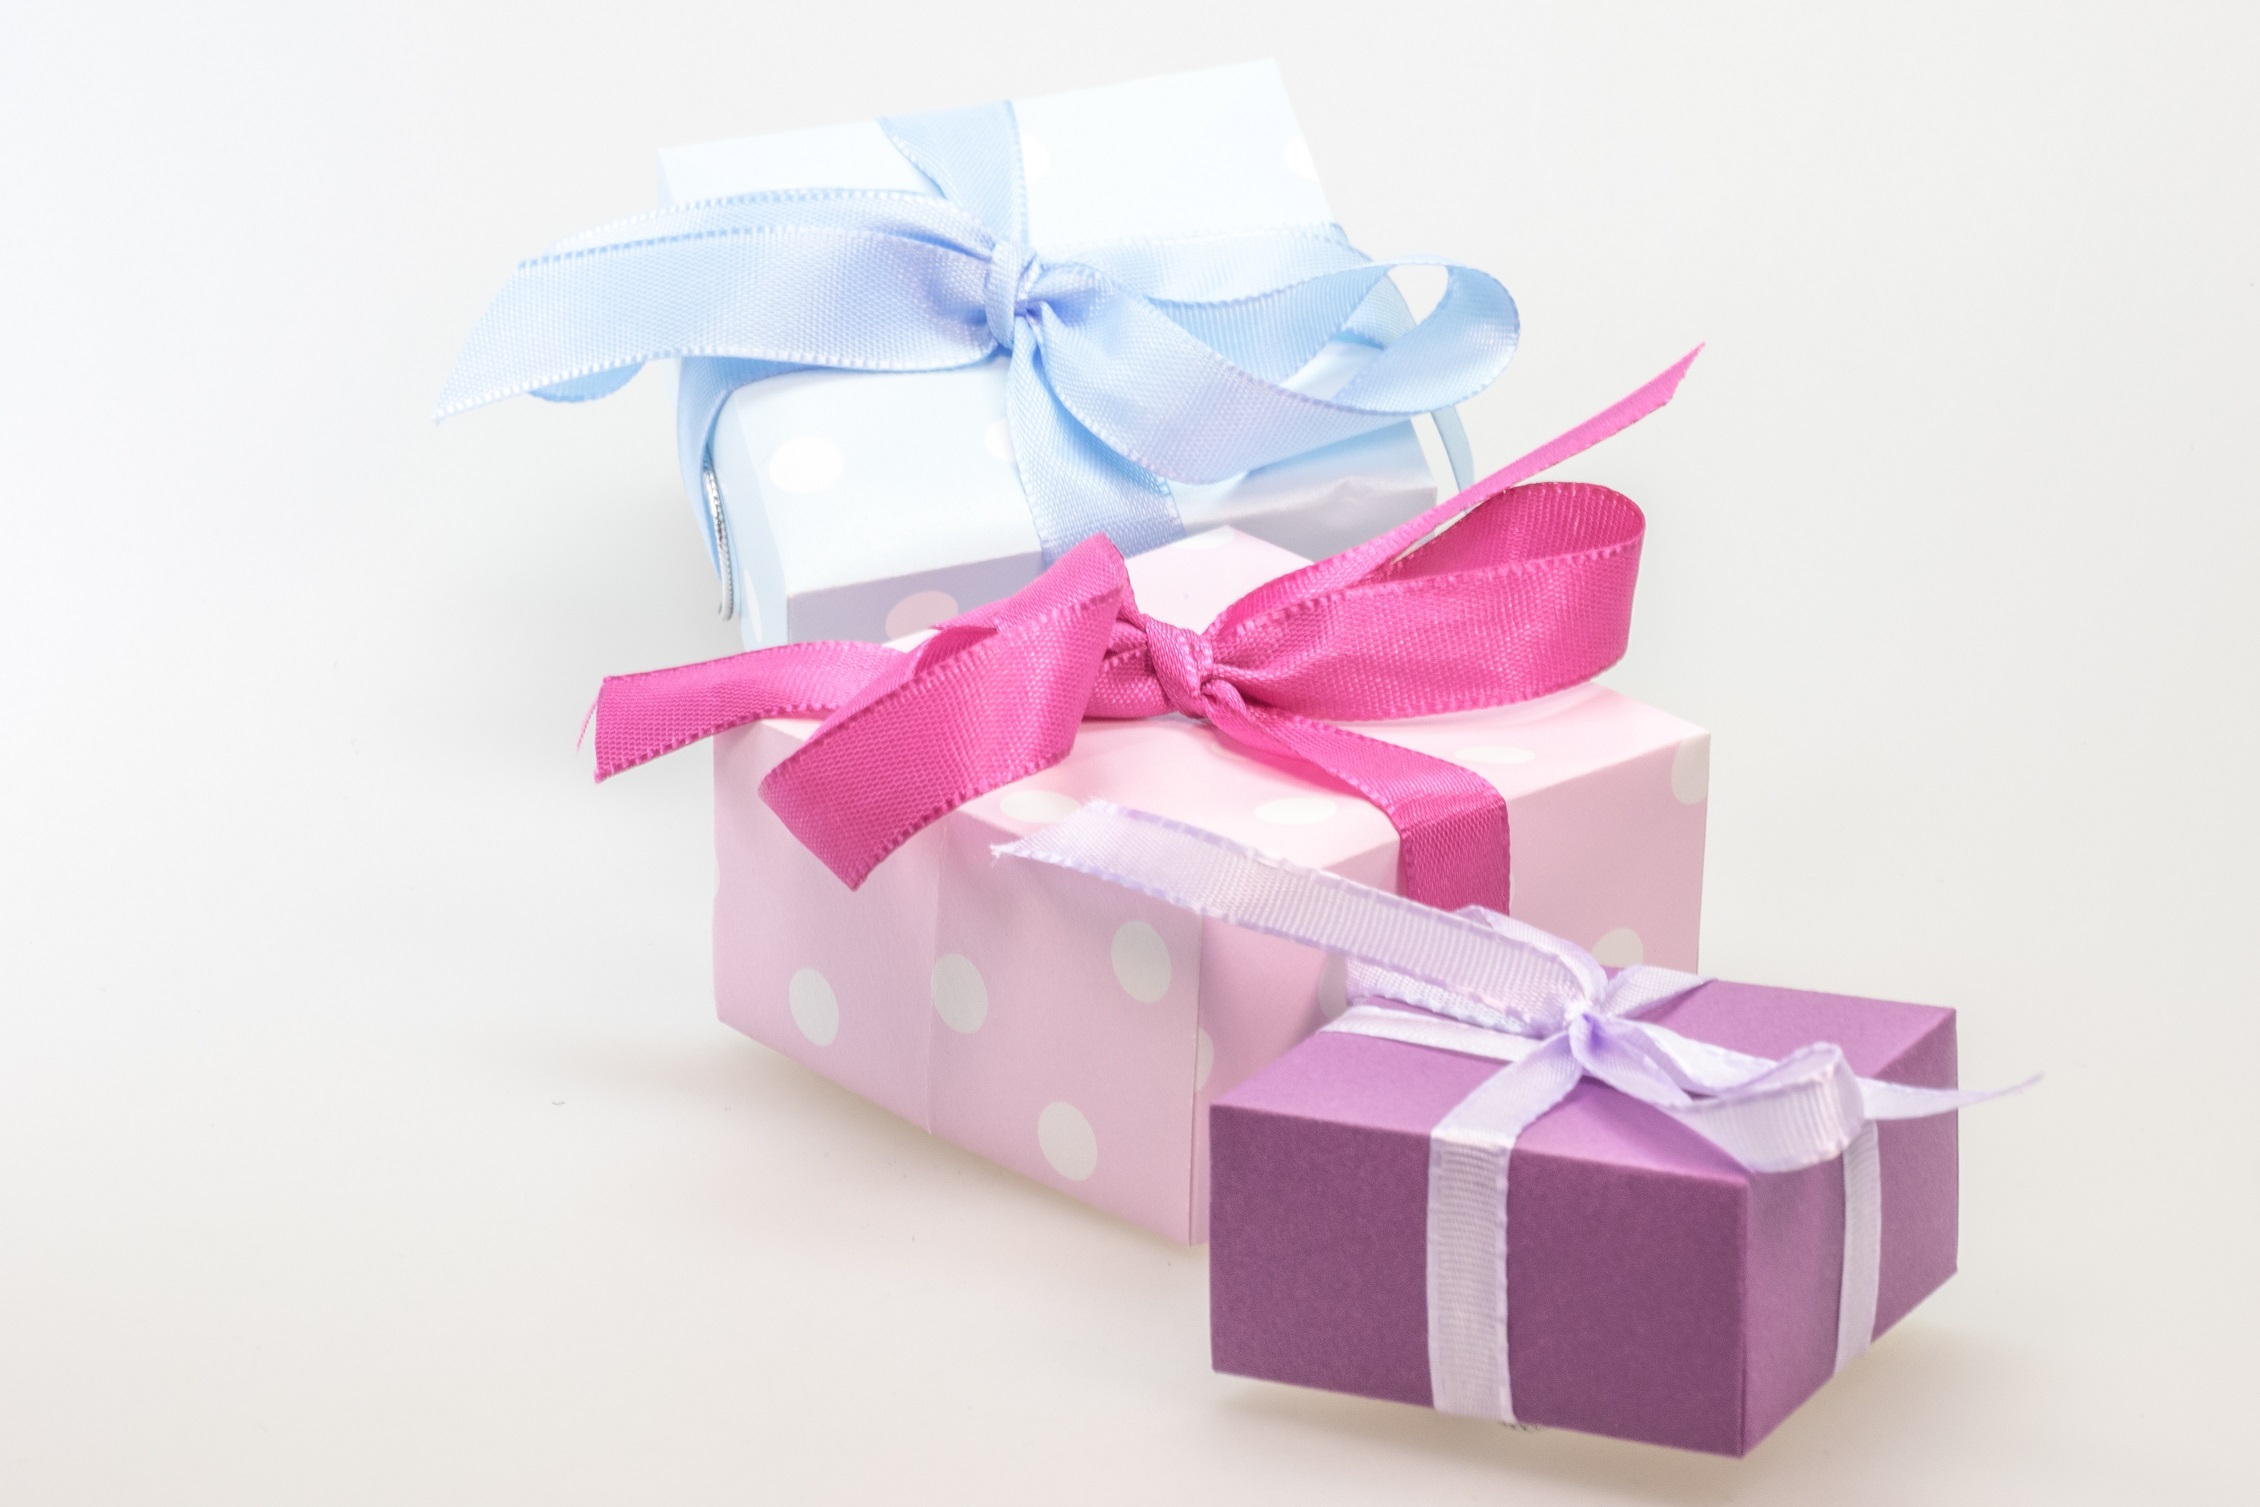 wrapped blue, pink and violet gift boxes